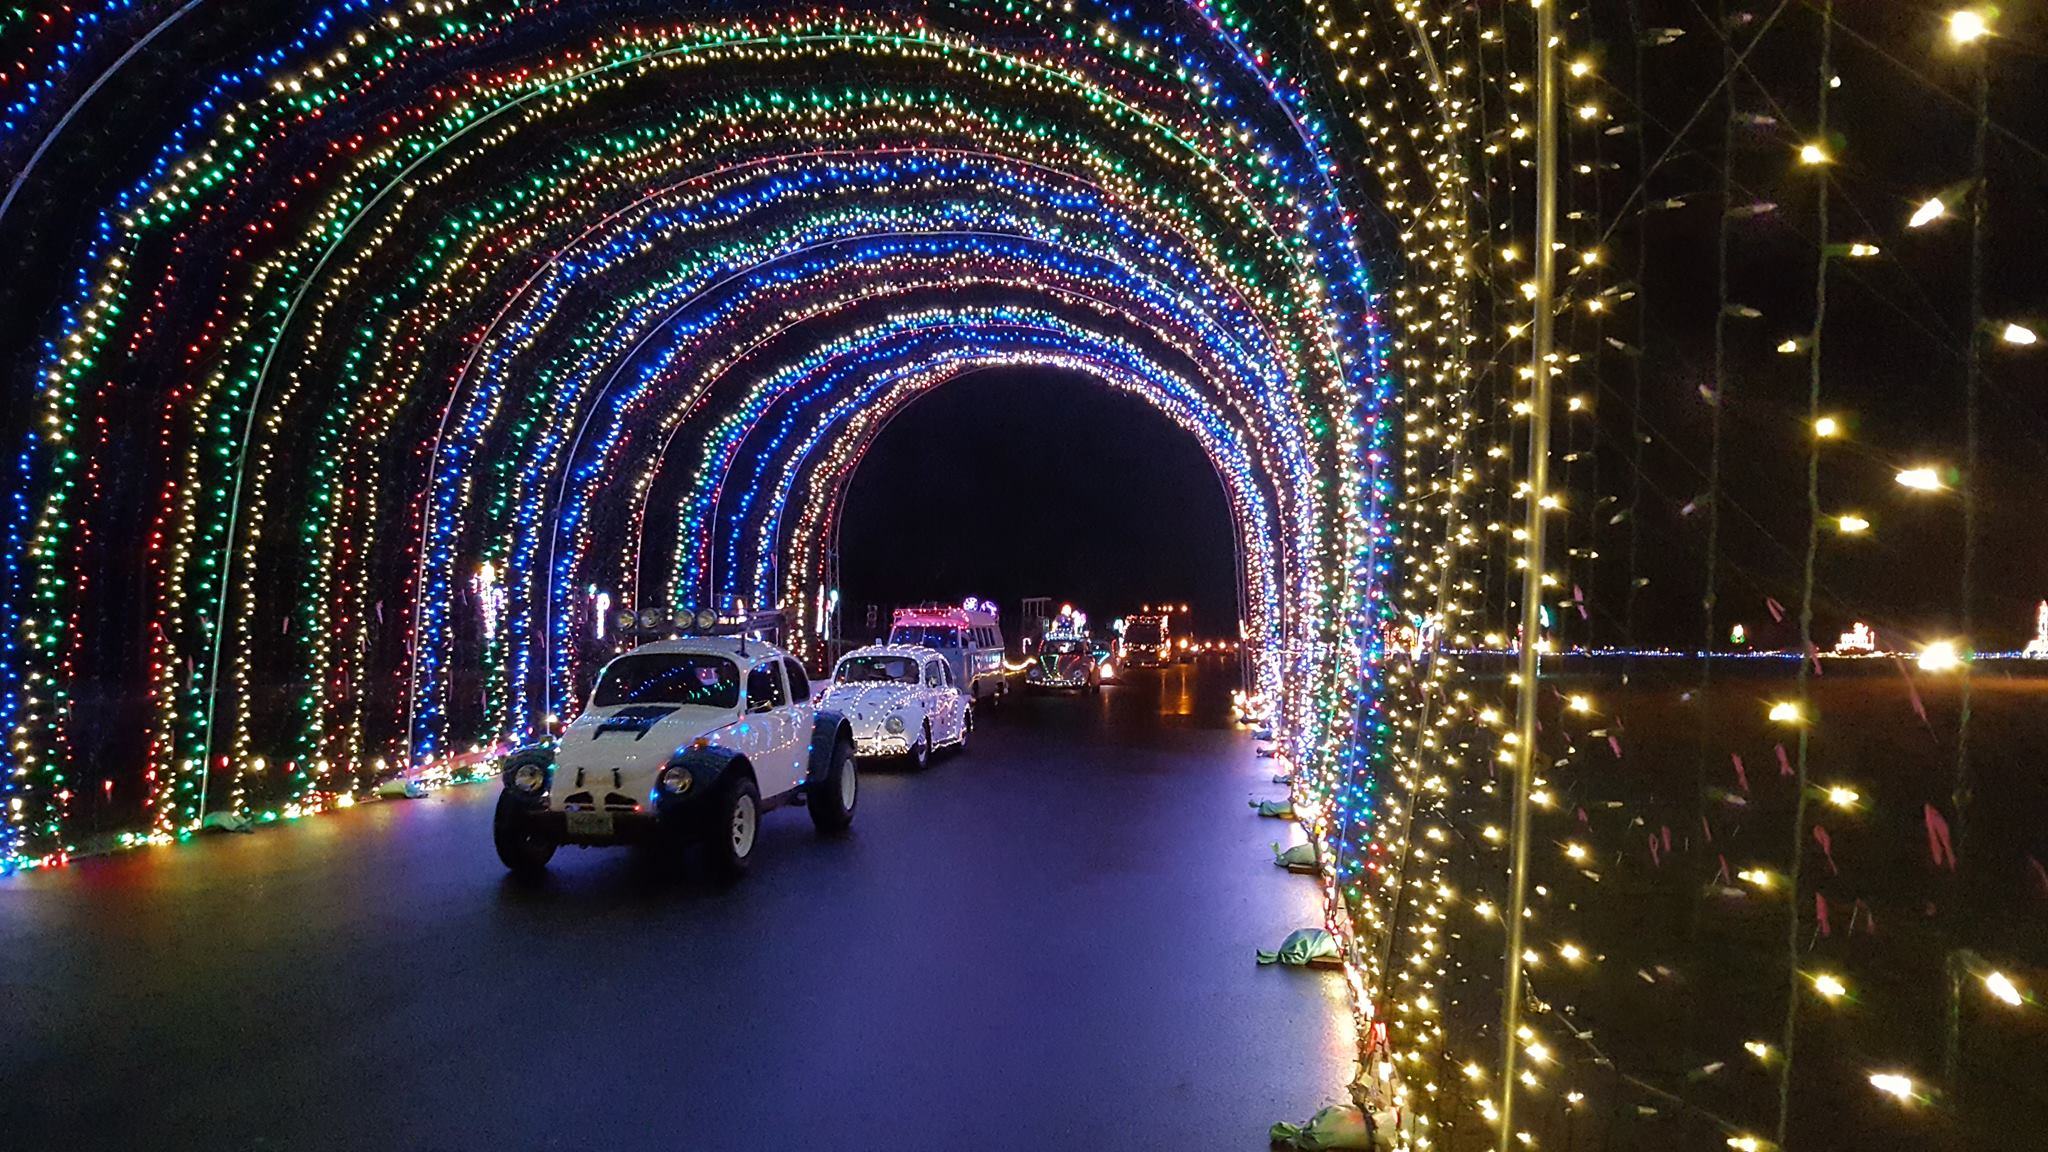 Volkswagons drive through a lights show at night.